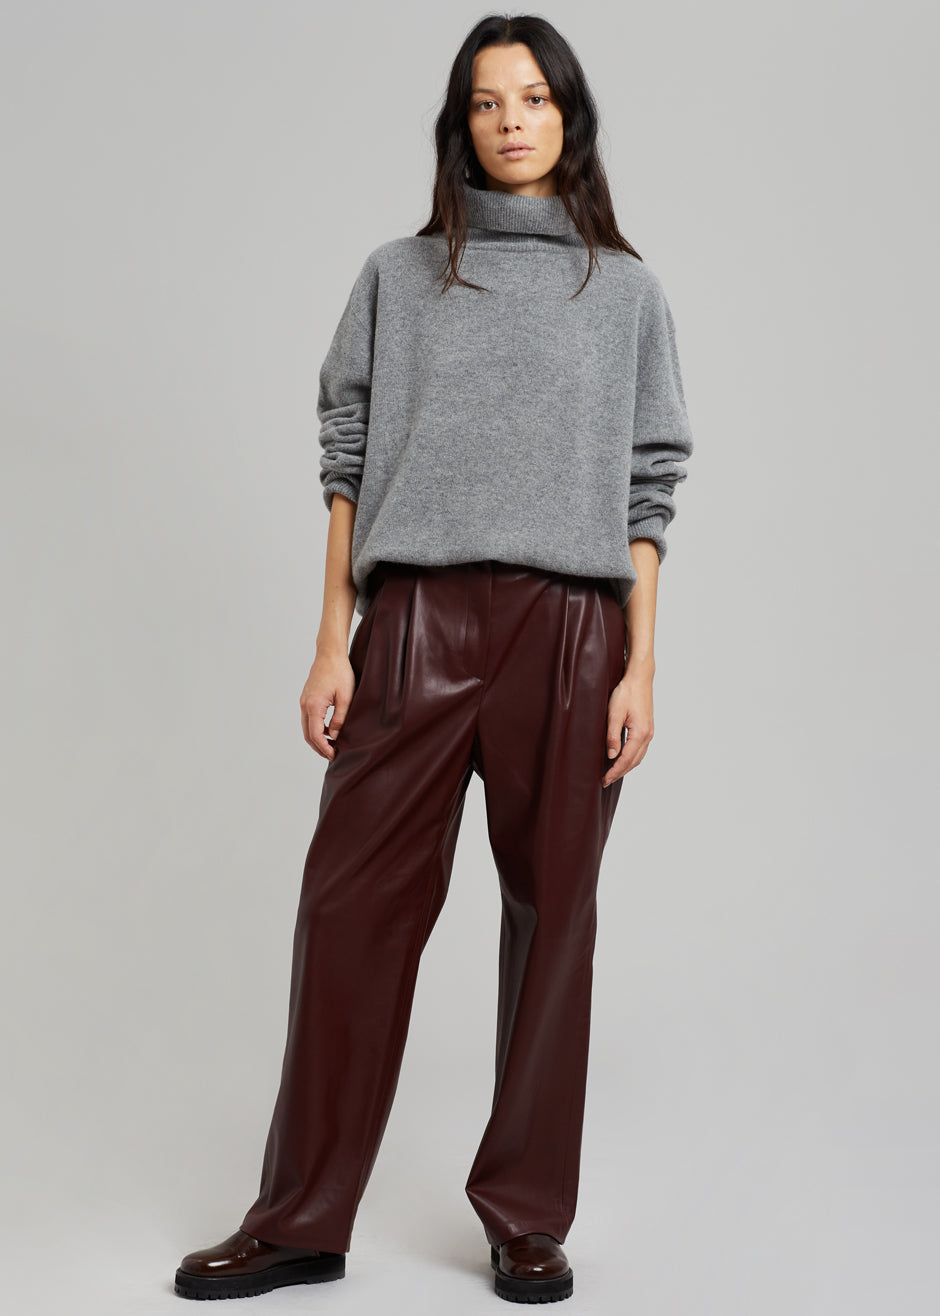 Pernille Faux Leather Pants - Burgundy - 1